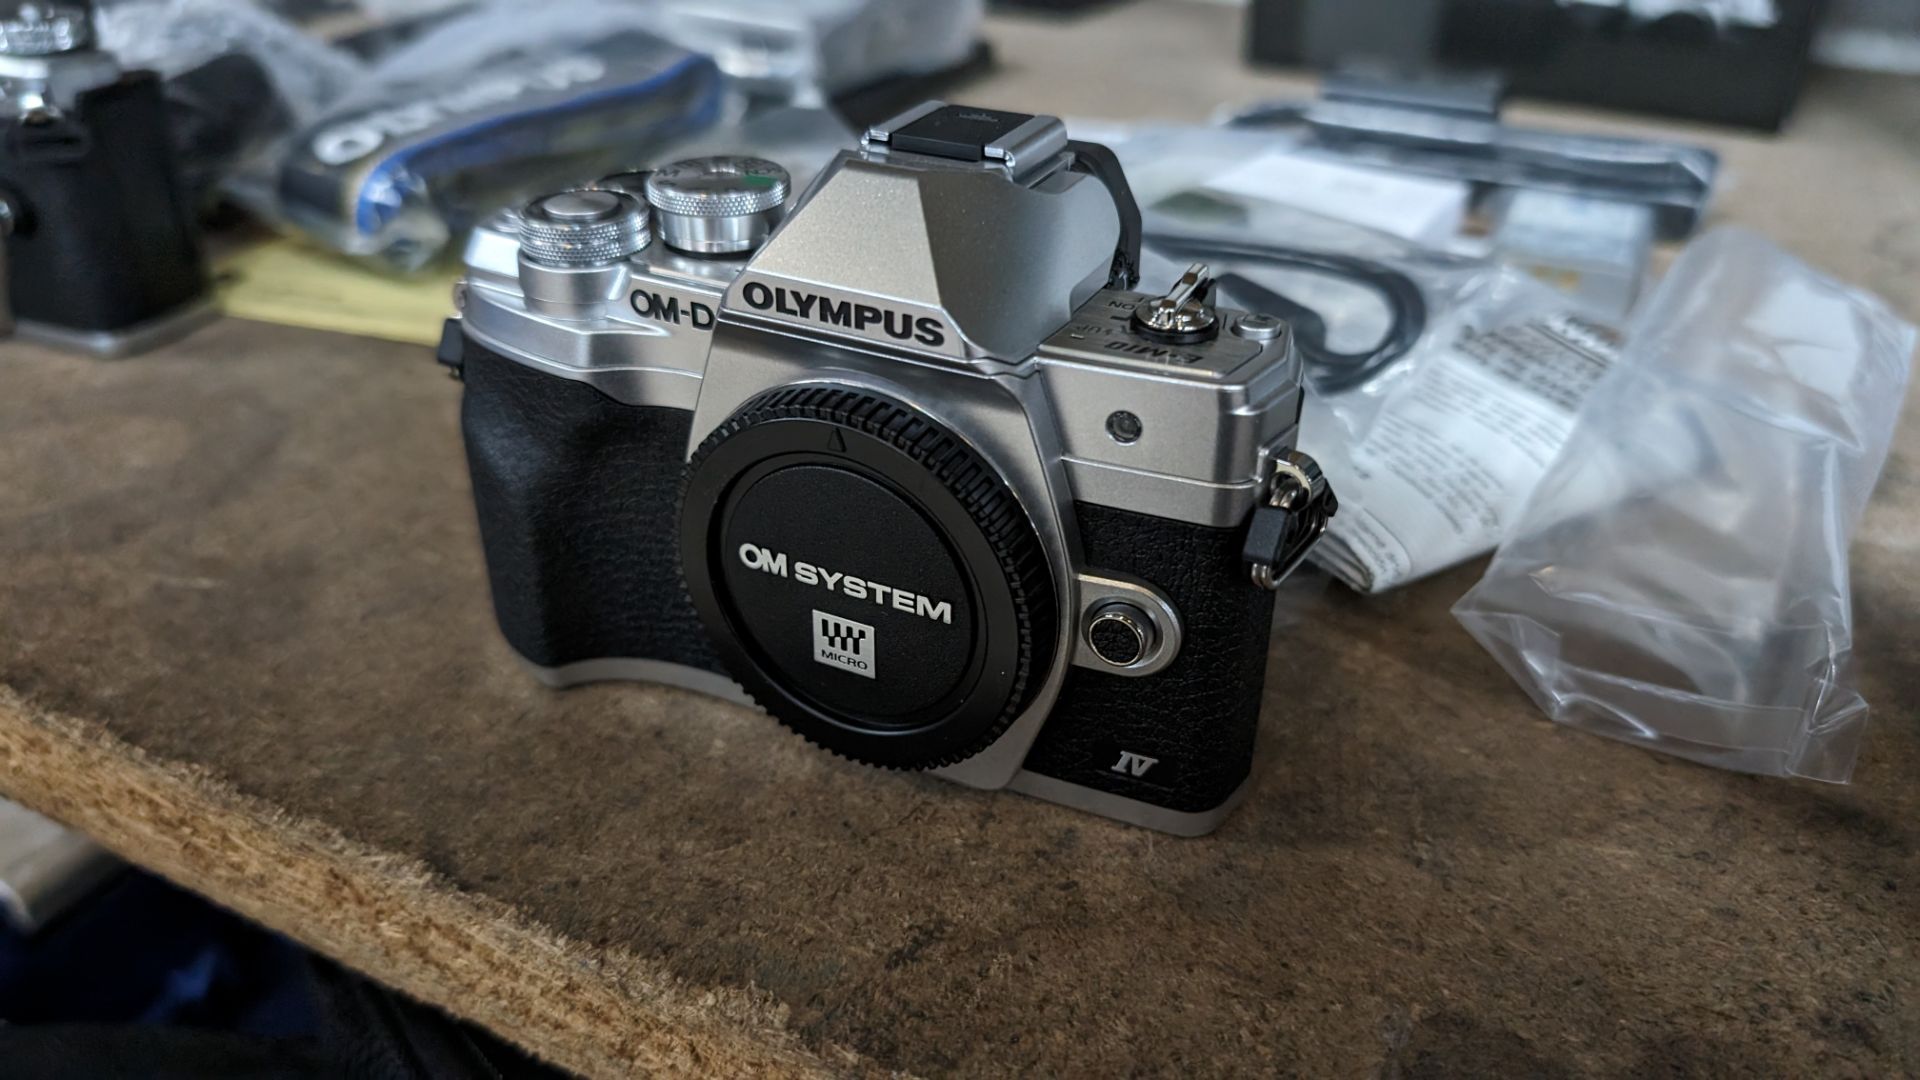 Olympus OM-D E-M10 Mark IV camera, in box, including strap, battery, adaptor and cable - Bild 4 aus 13